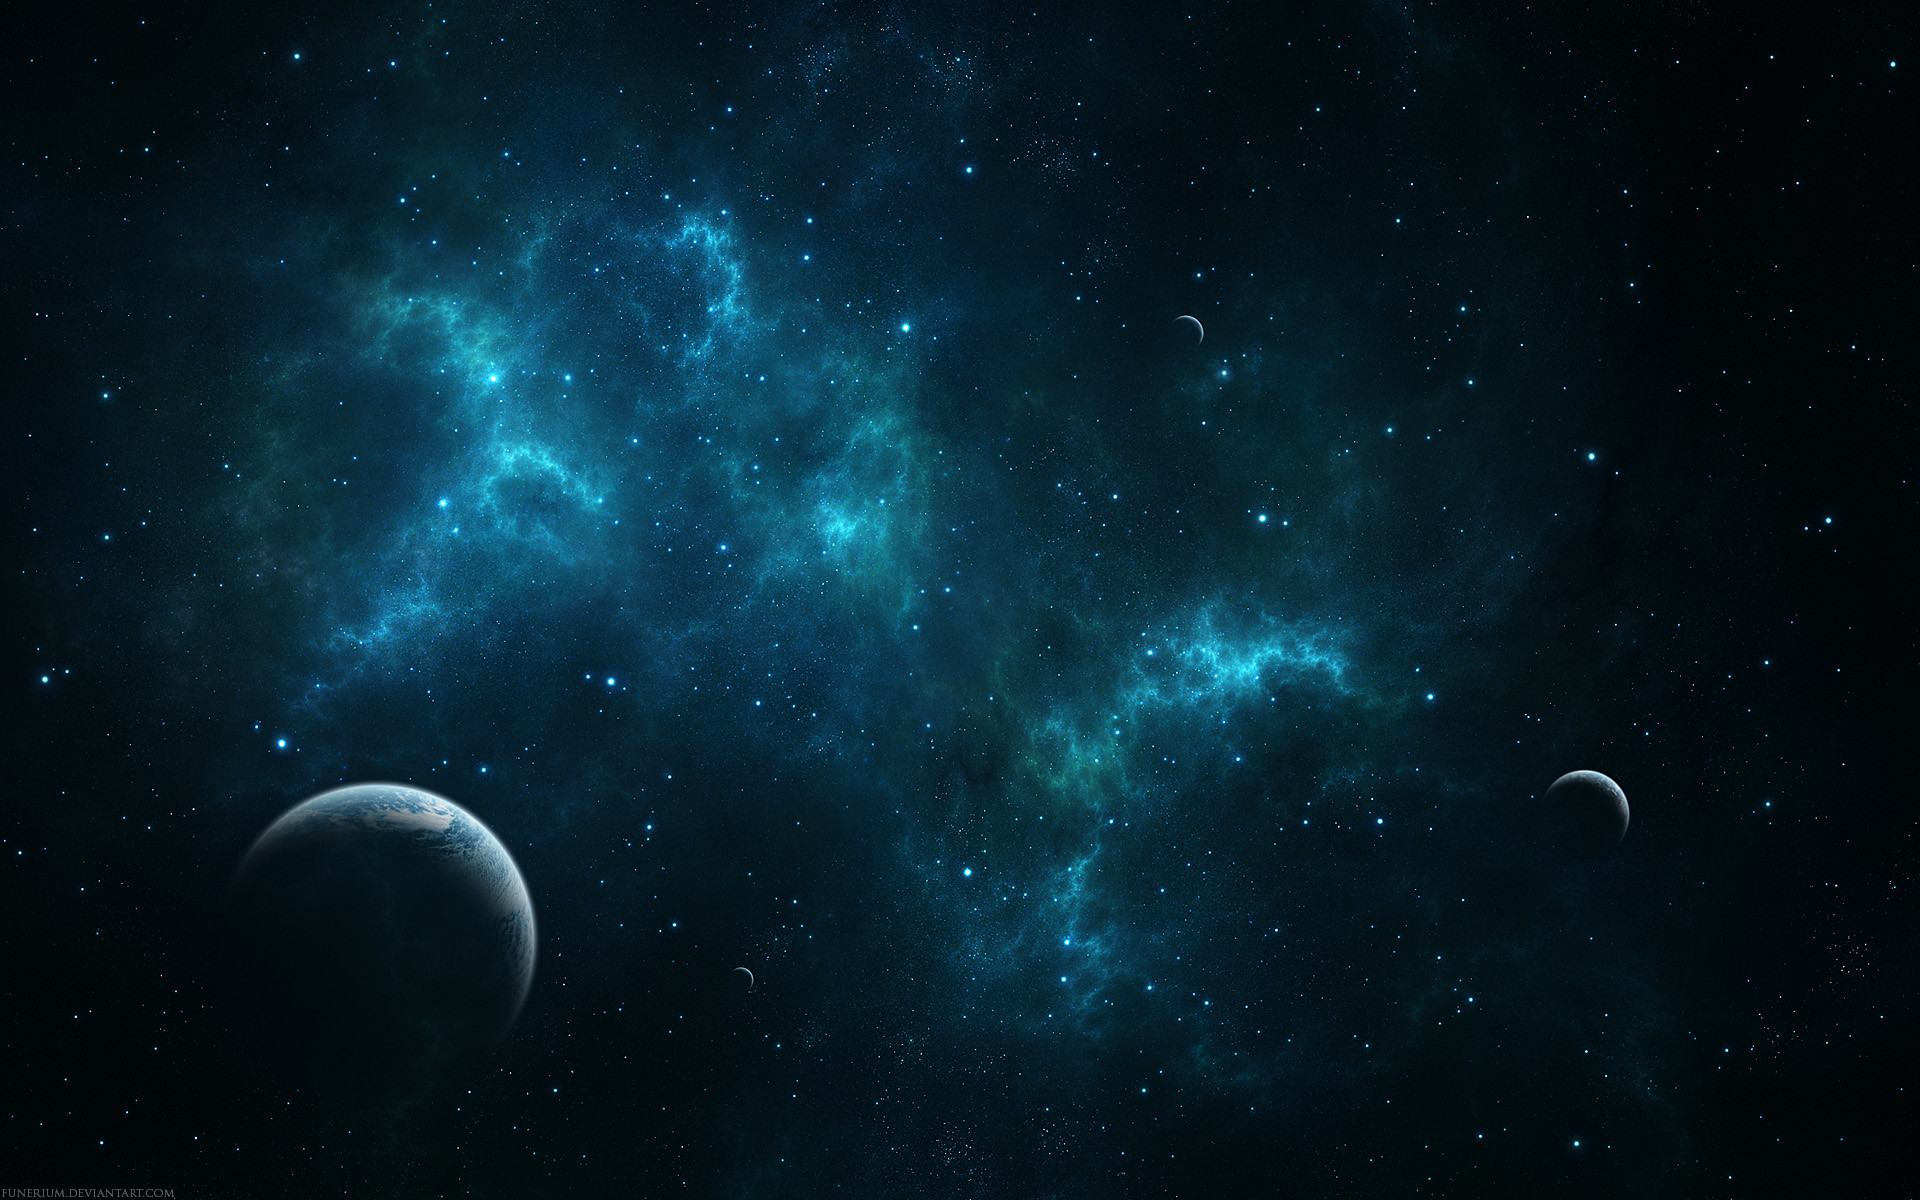 1920x1200 Download Free #Space #Wallpapers, Pictures and Desktop Backgrounds. Amazing  collection of Widescreen